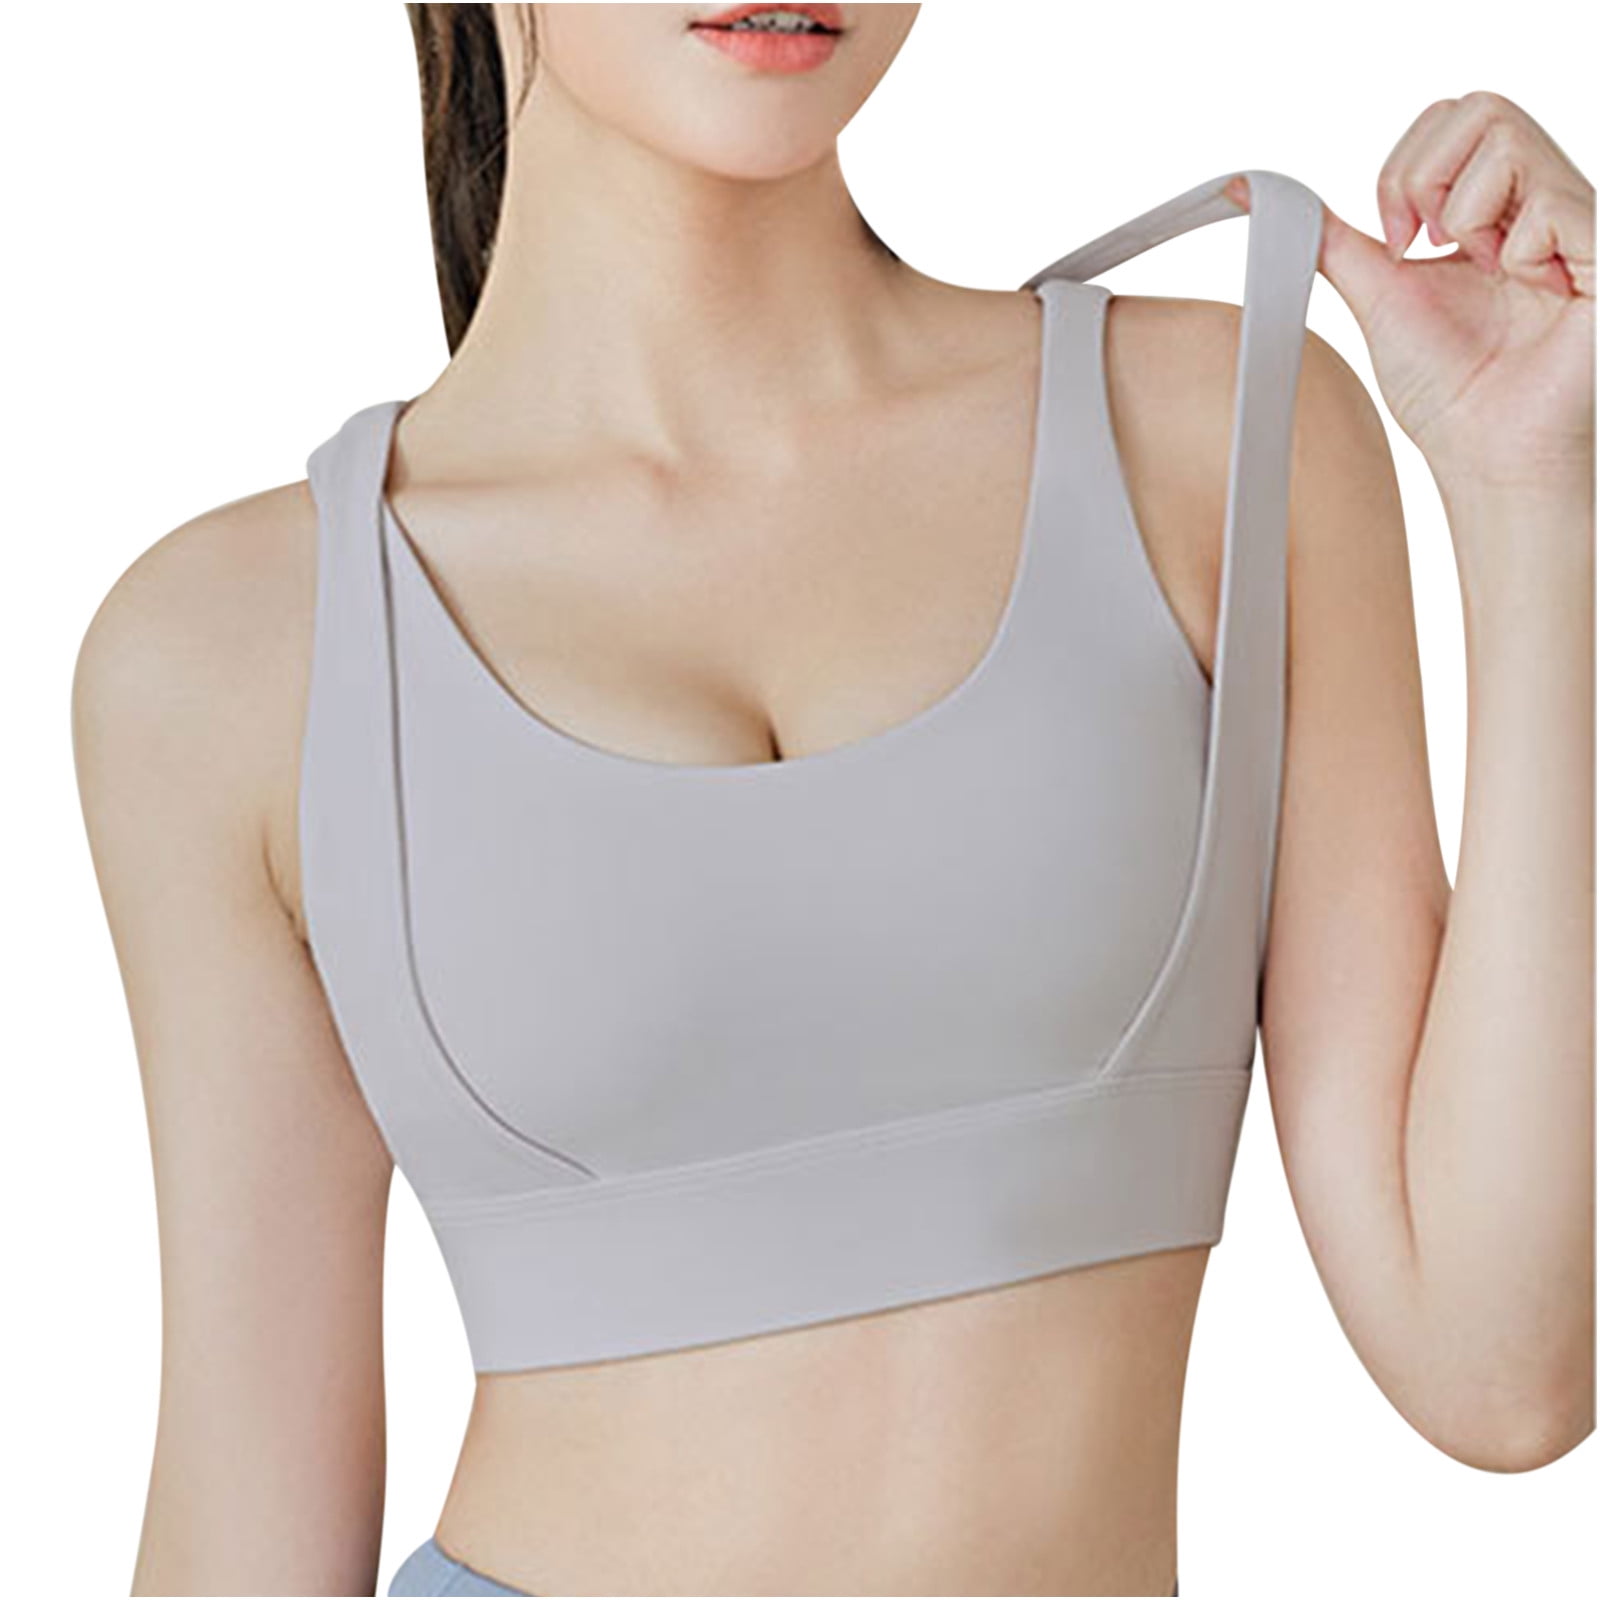 Upgraded Sports Bras for Women - Yoga Bra Tank Tops with Removable